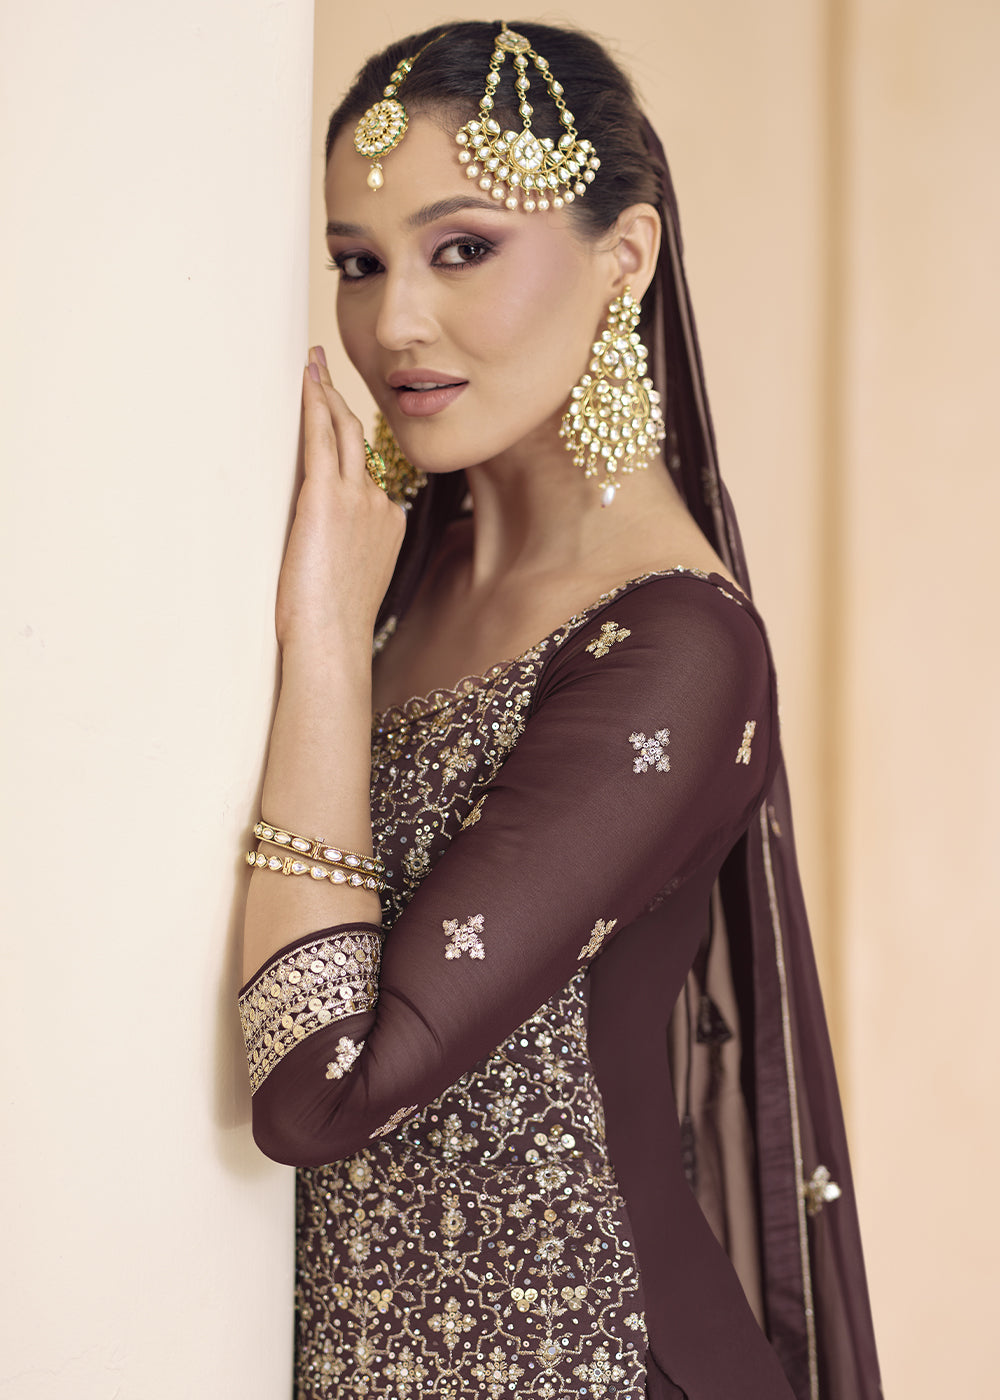 Mocha Brown Embroidered Georgette Top & Skirt Set with Dupatta